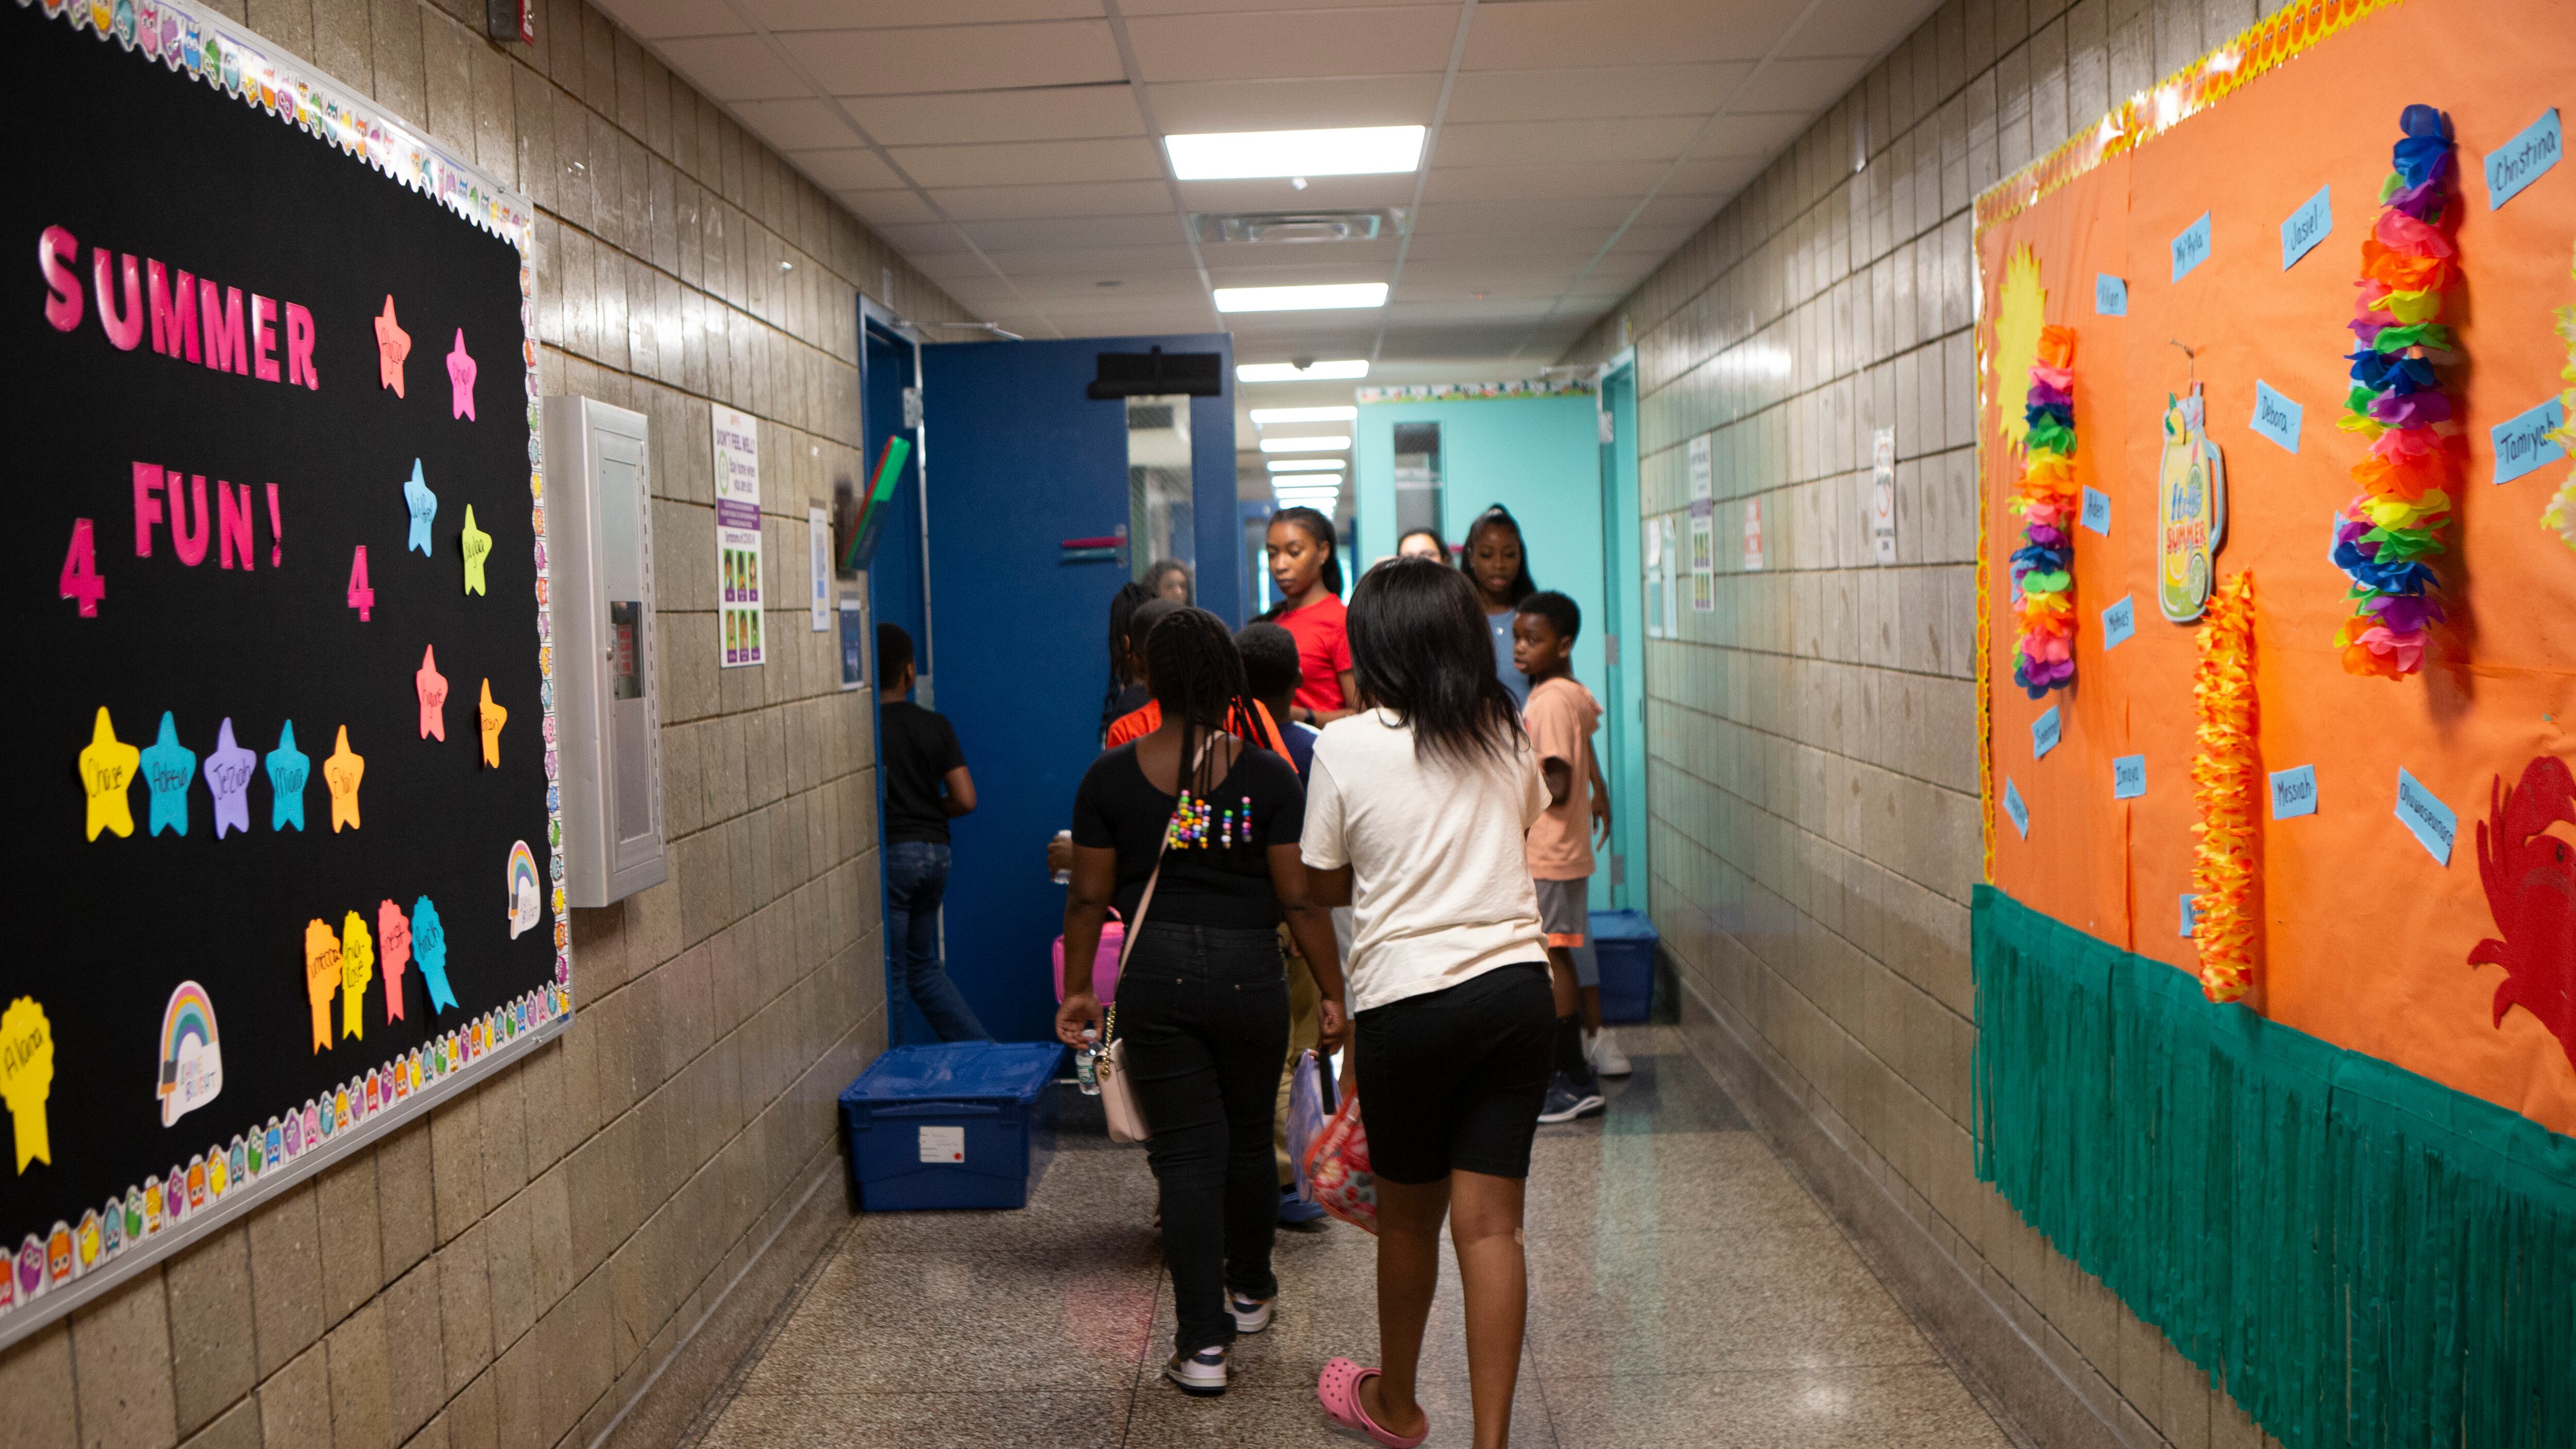 A group of  students and faculty walk down a hallway with posters and decorations on the walls.